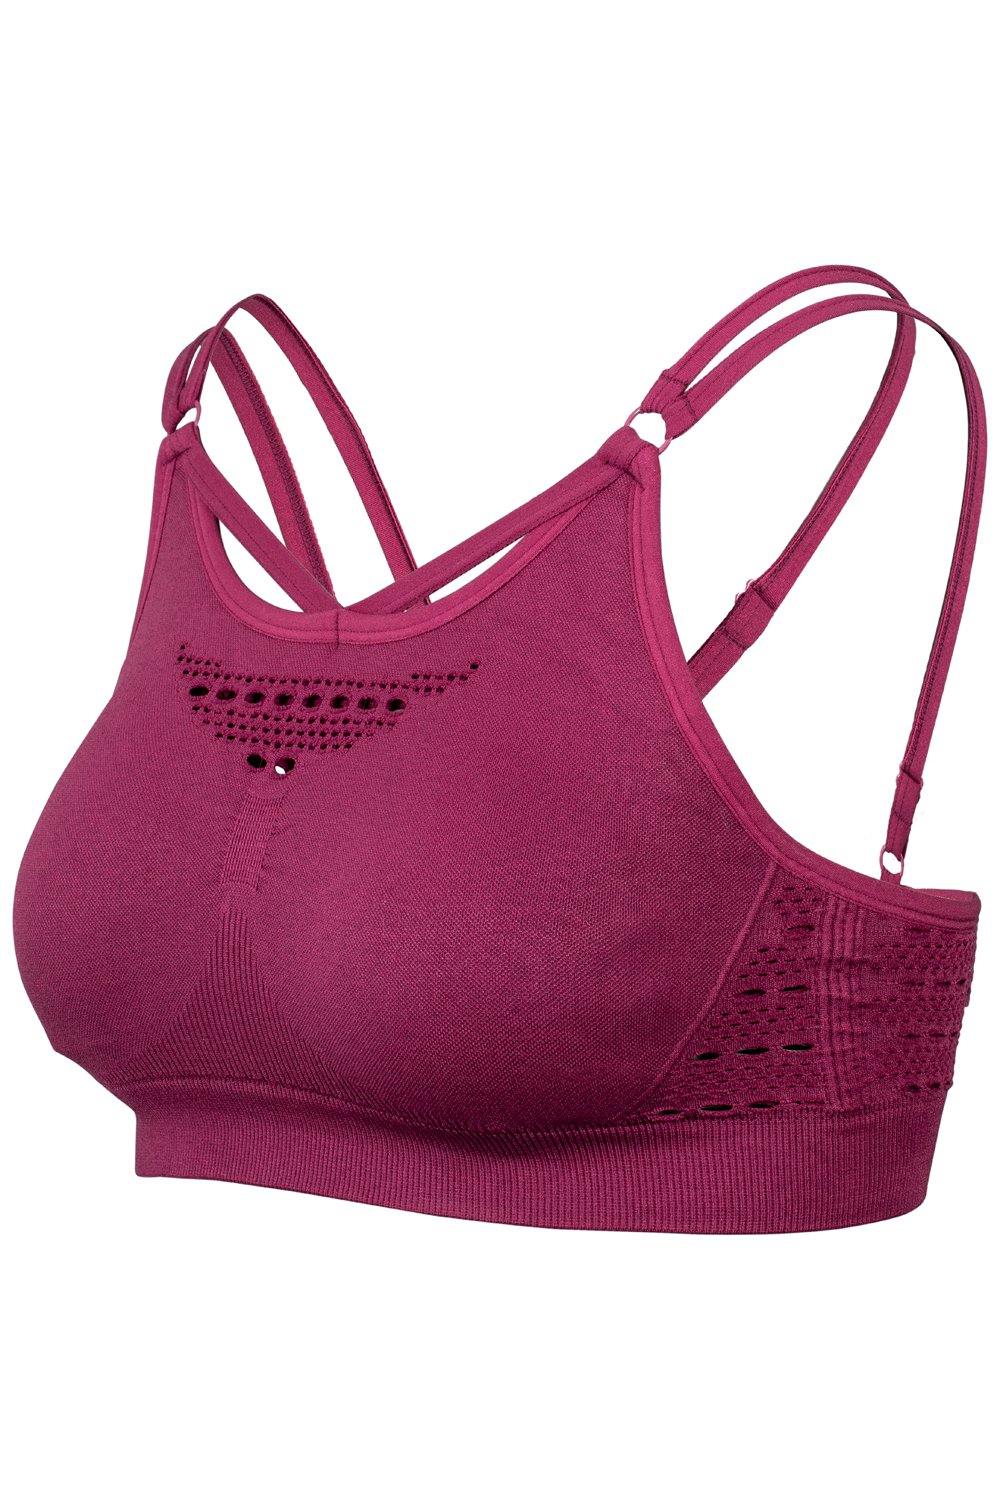 Carbon 38 Sports Bras with crochet detail on the back.